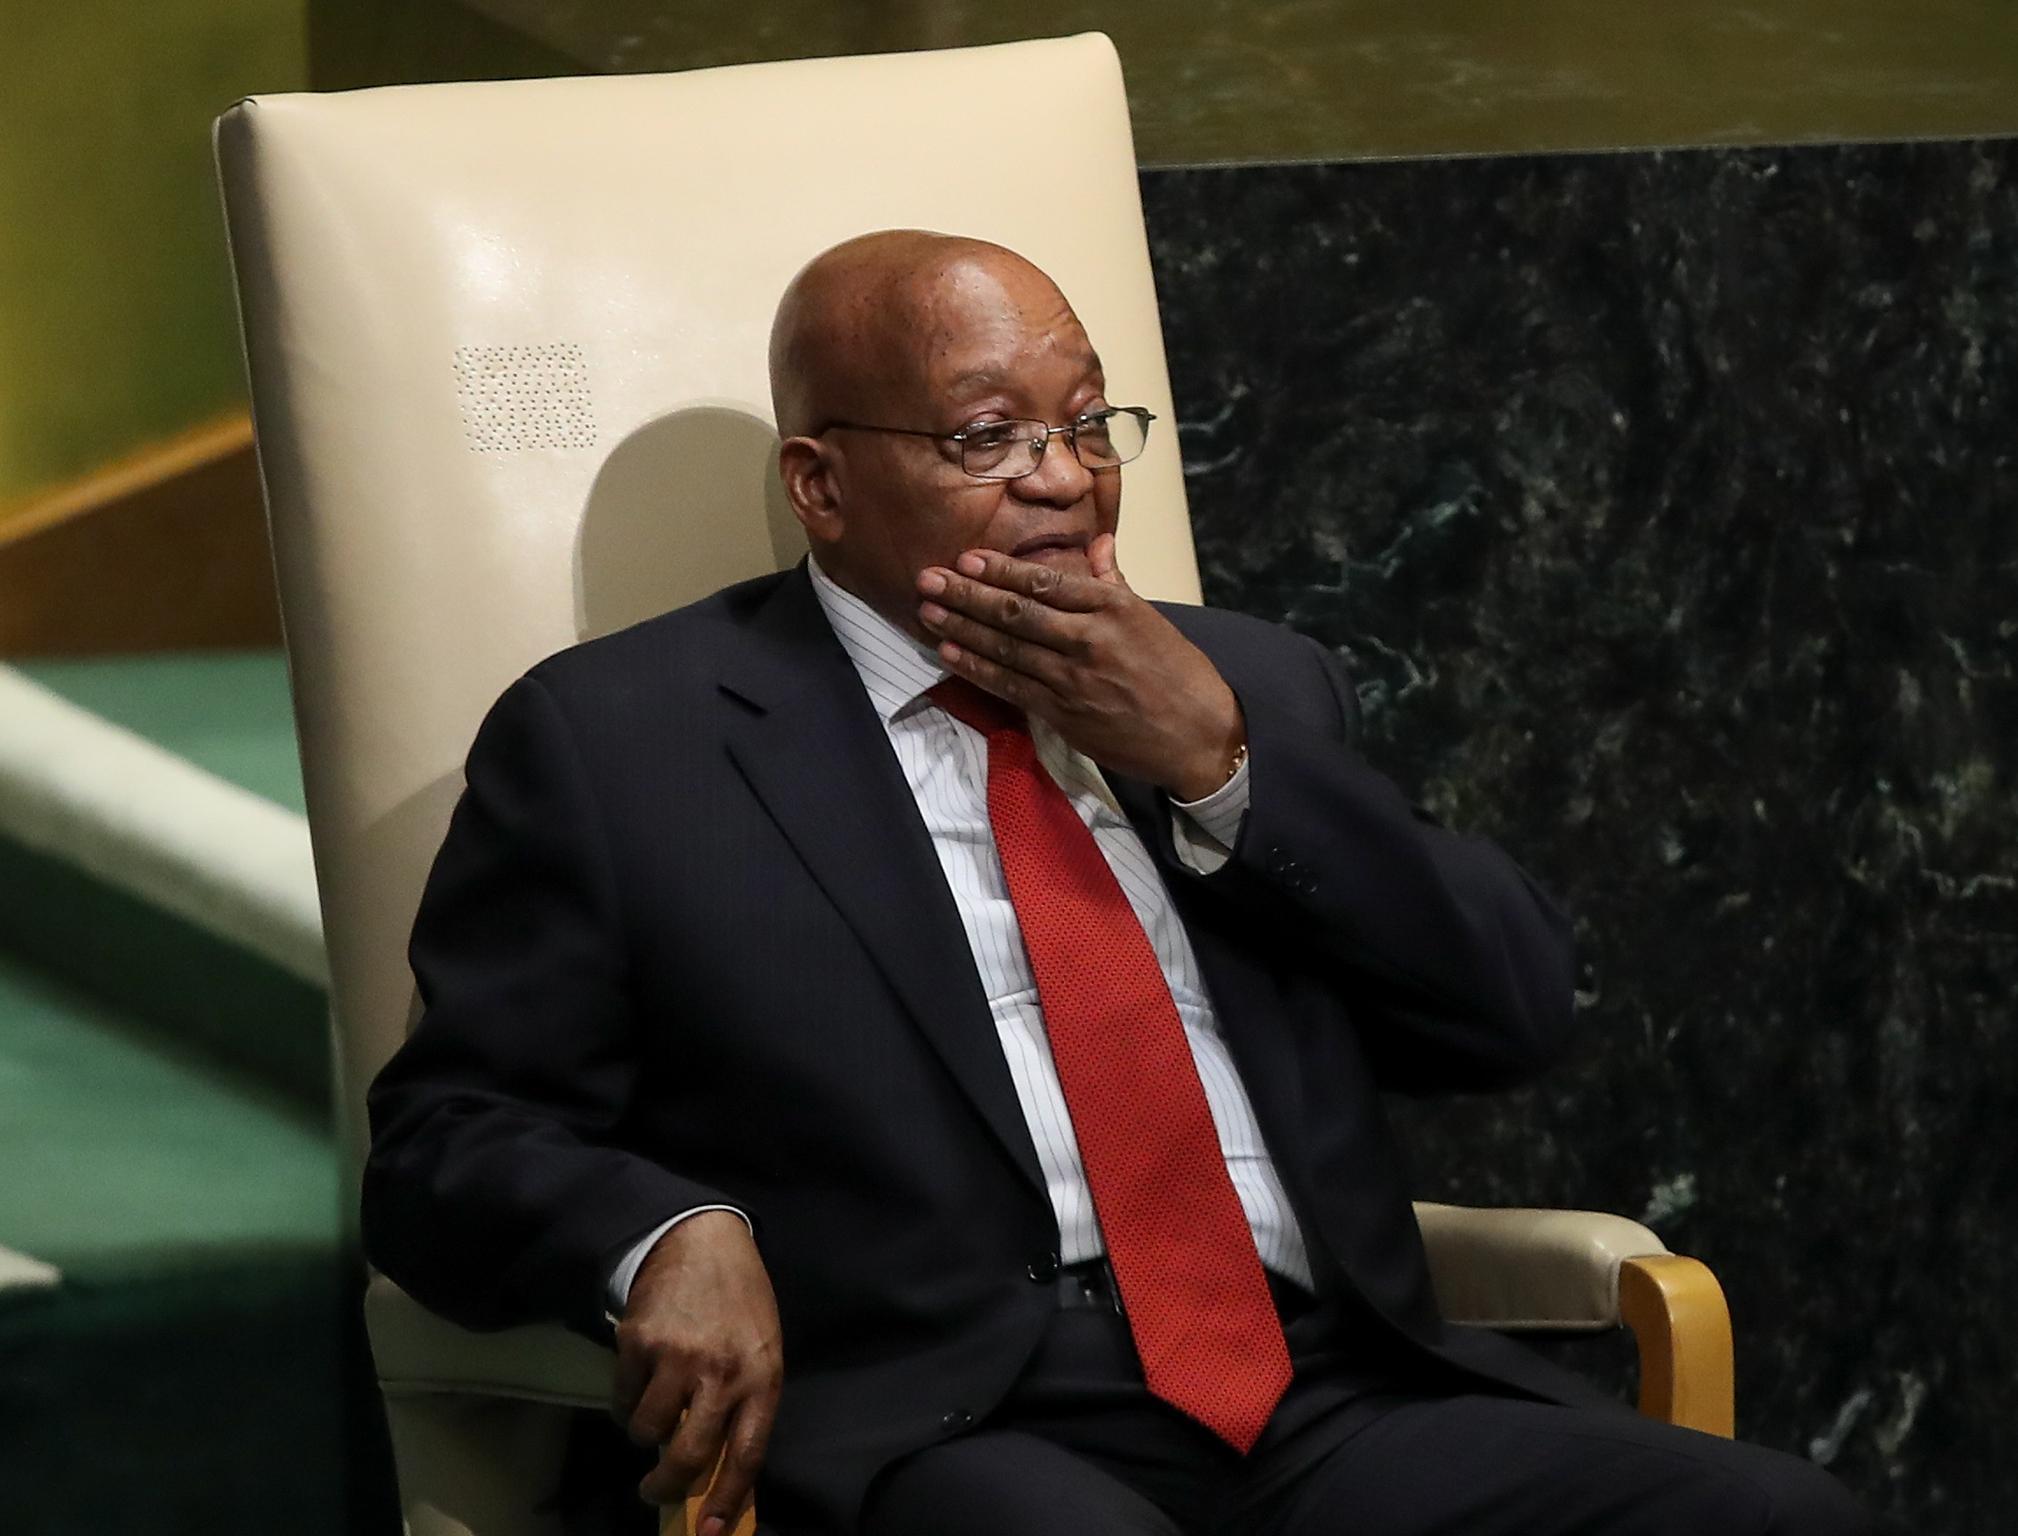 The South African President is due to step down in 2019, after more than ten years in power